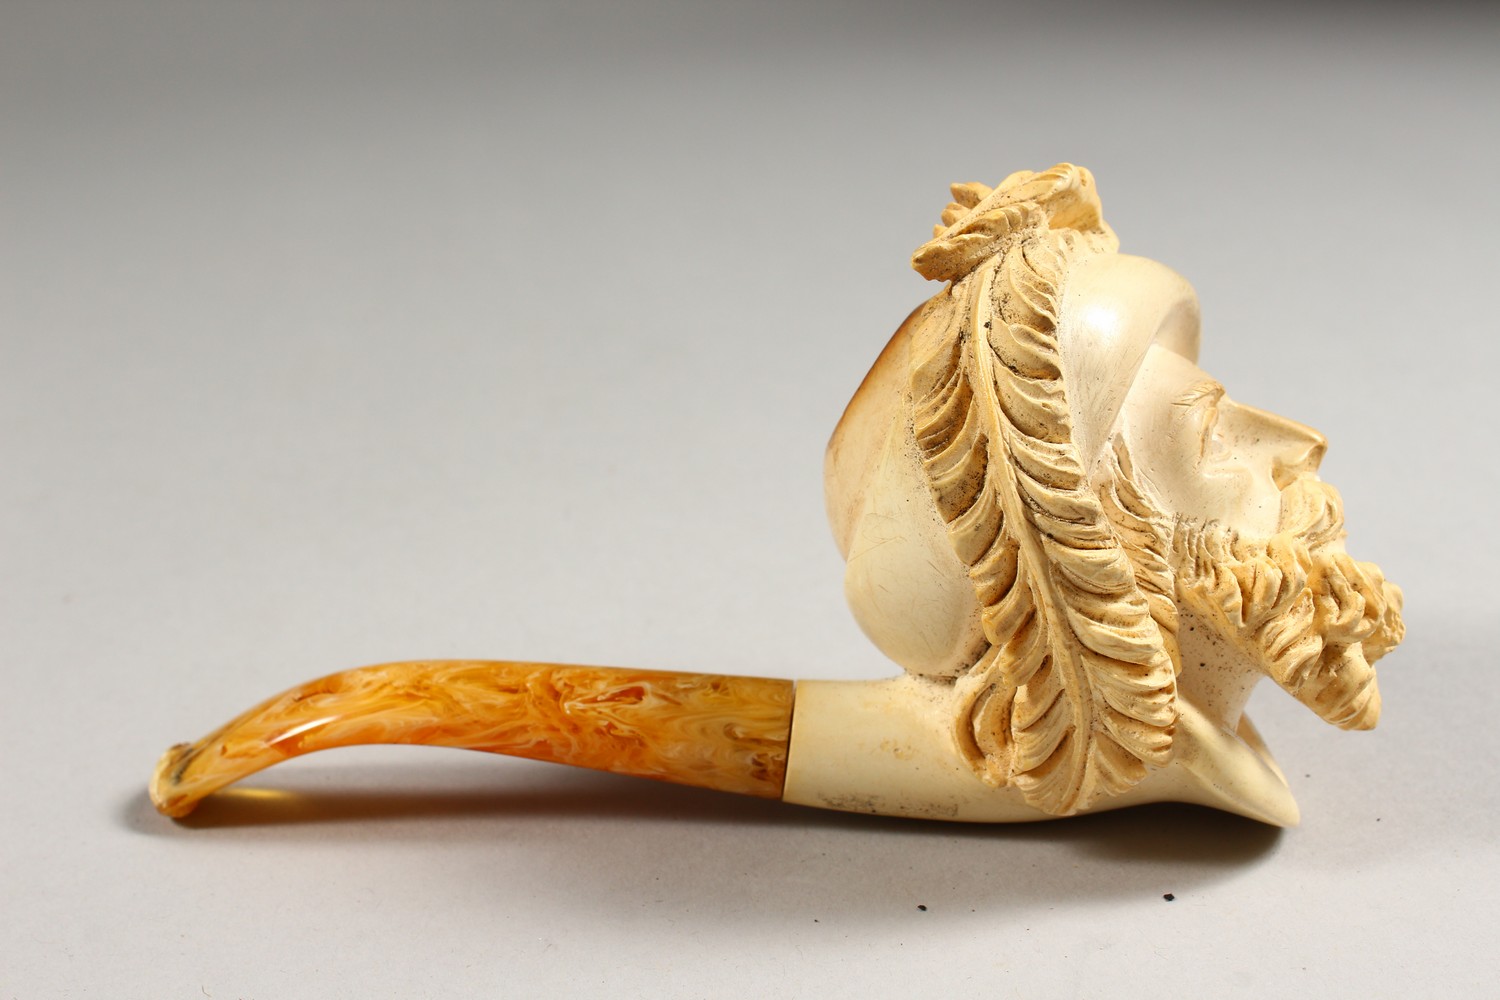 A VERY GOOD MEERSCHAUM PIPE, the bowl modelled as a bearded gentleman, in a fitted case. - Image 8 of 14